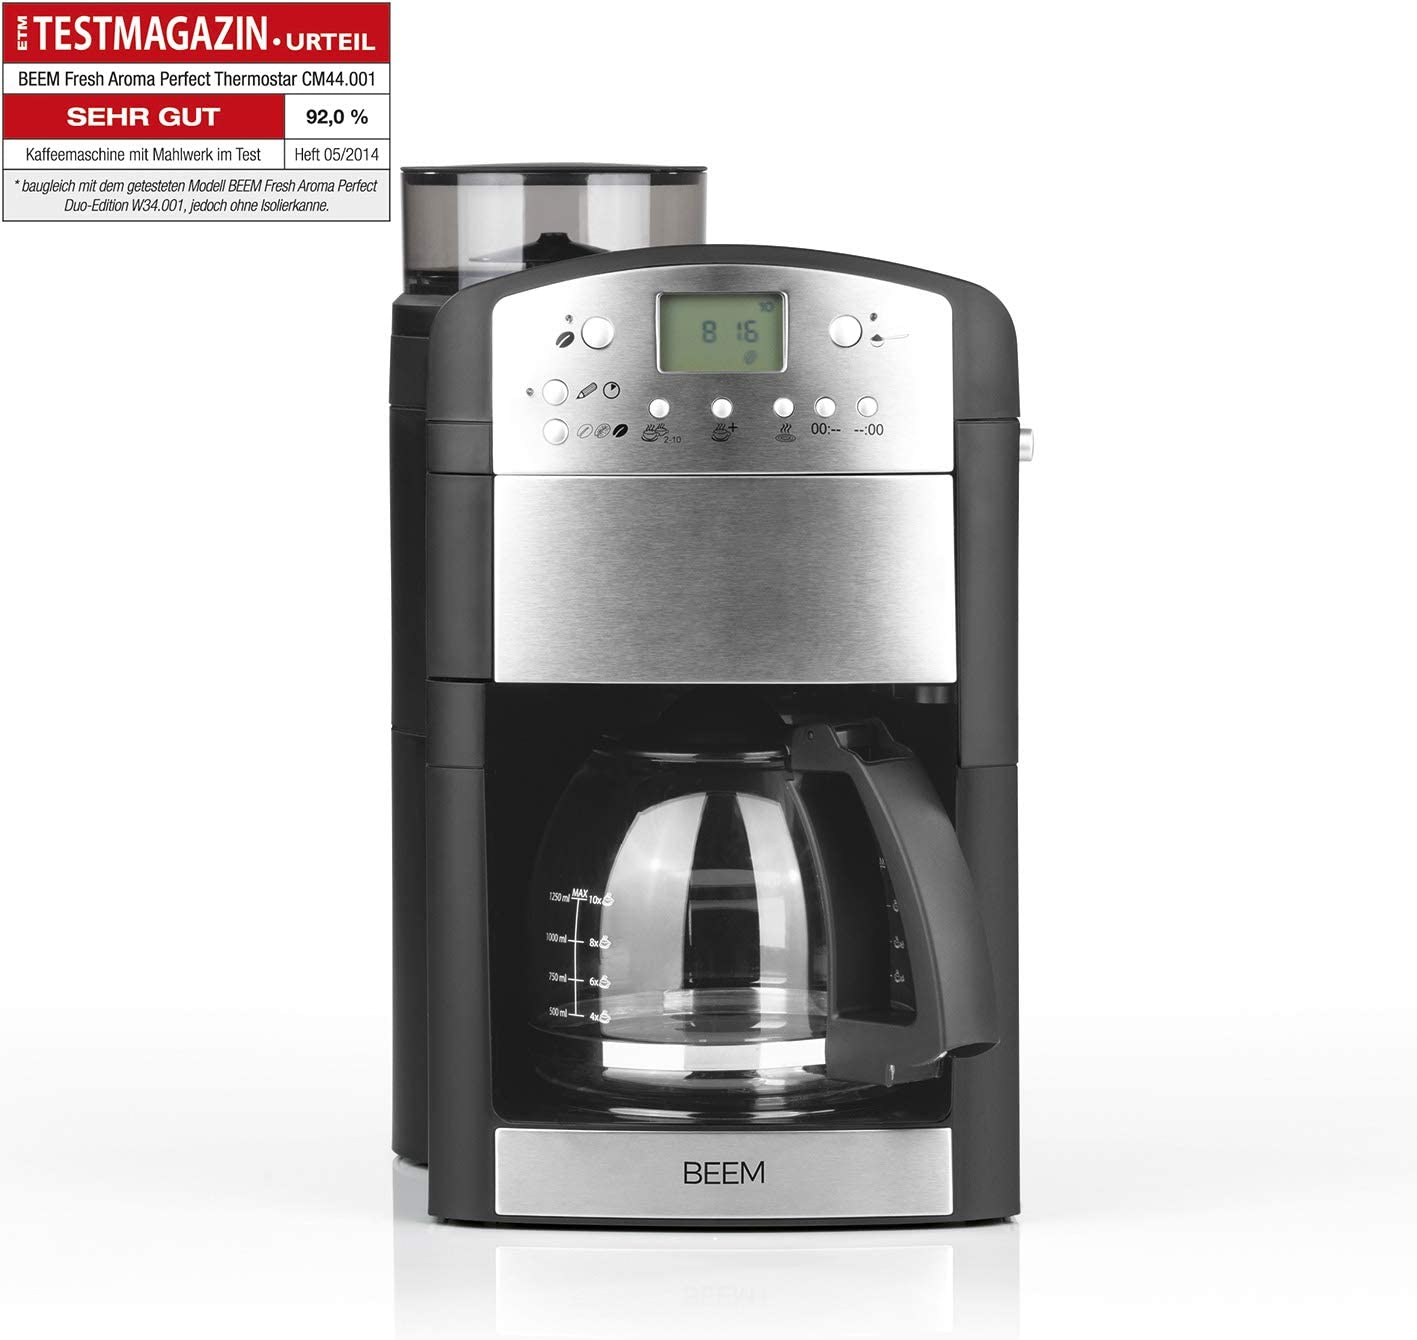 BEEM 02049 Fresh-Aroma-Perfect Thermolux (Improved Version 2019!) Coffee machine with grinder (92°C, 1000 Watt) For 2-10 cups incl. various accessories.